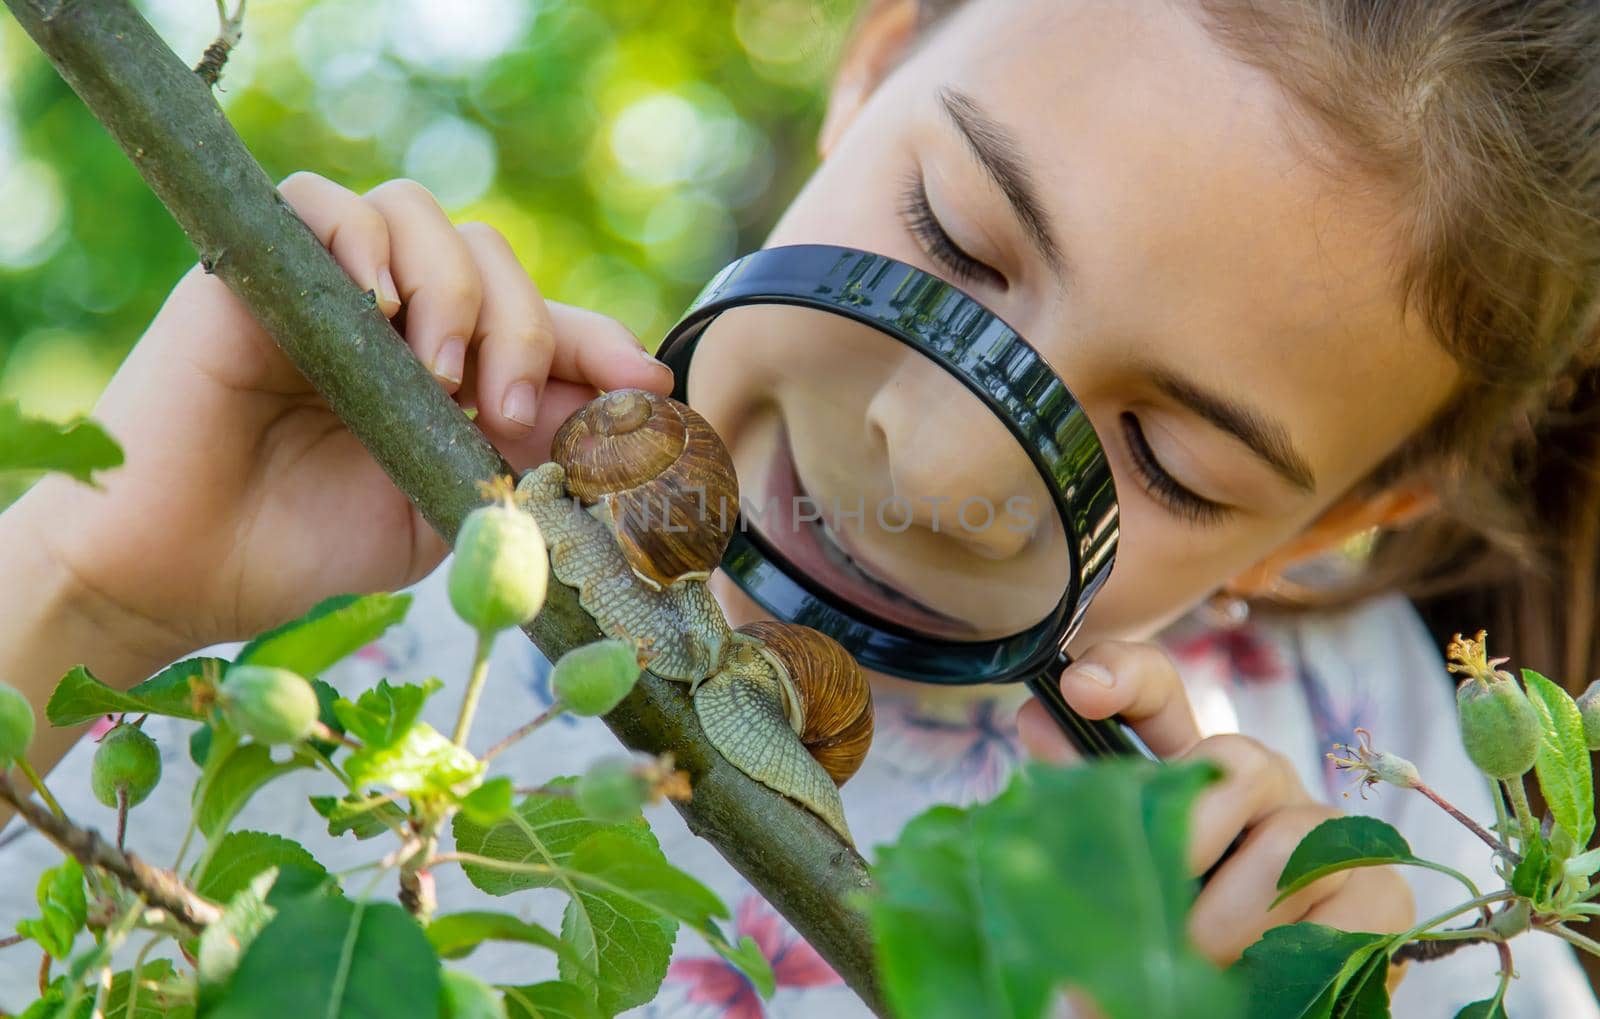 The child examines the snails on the tree. Selective focus. Nature.